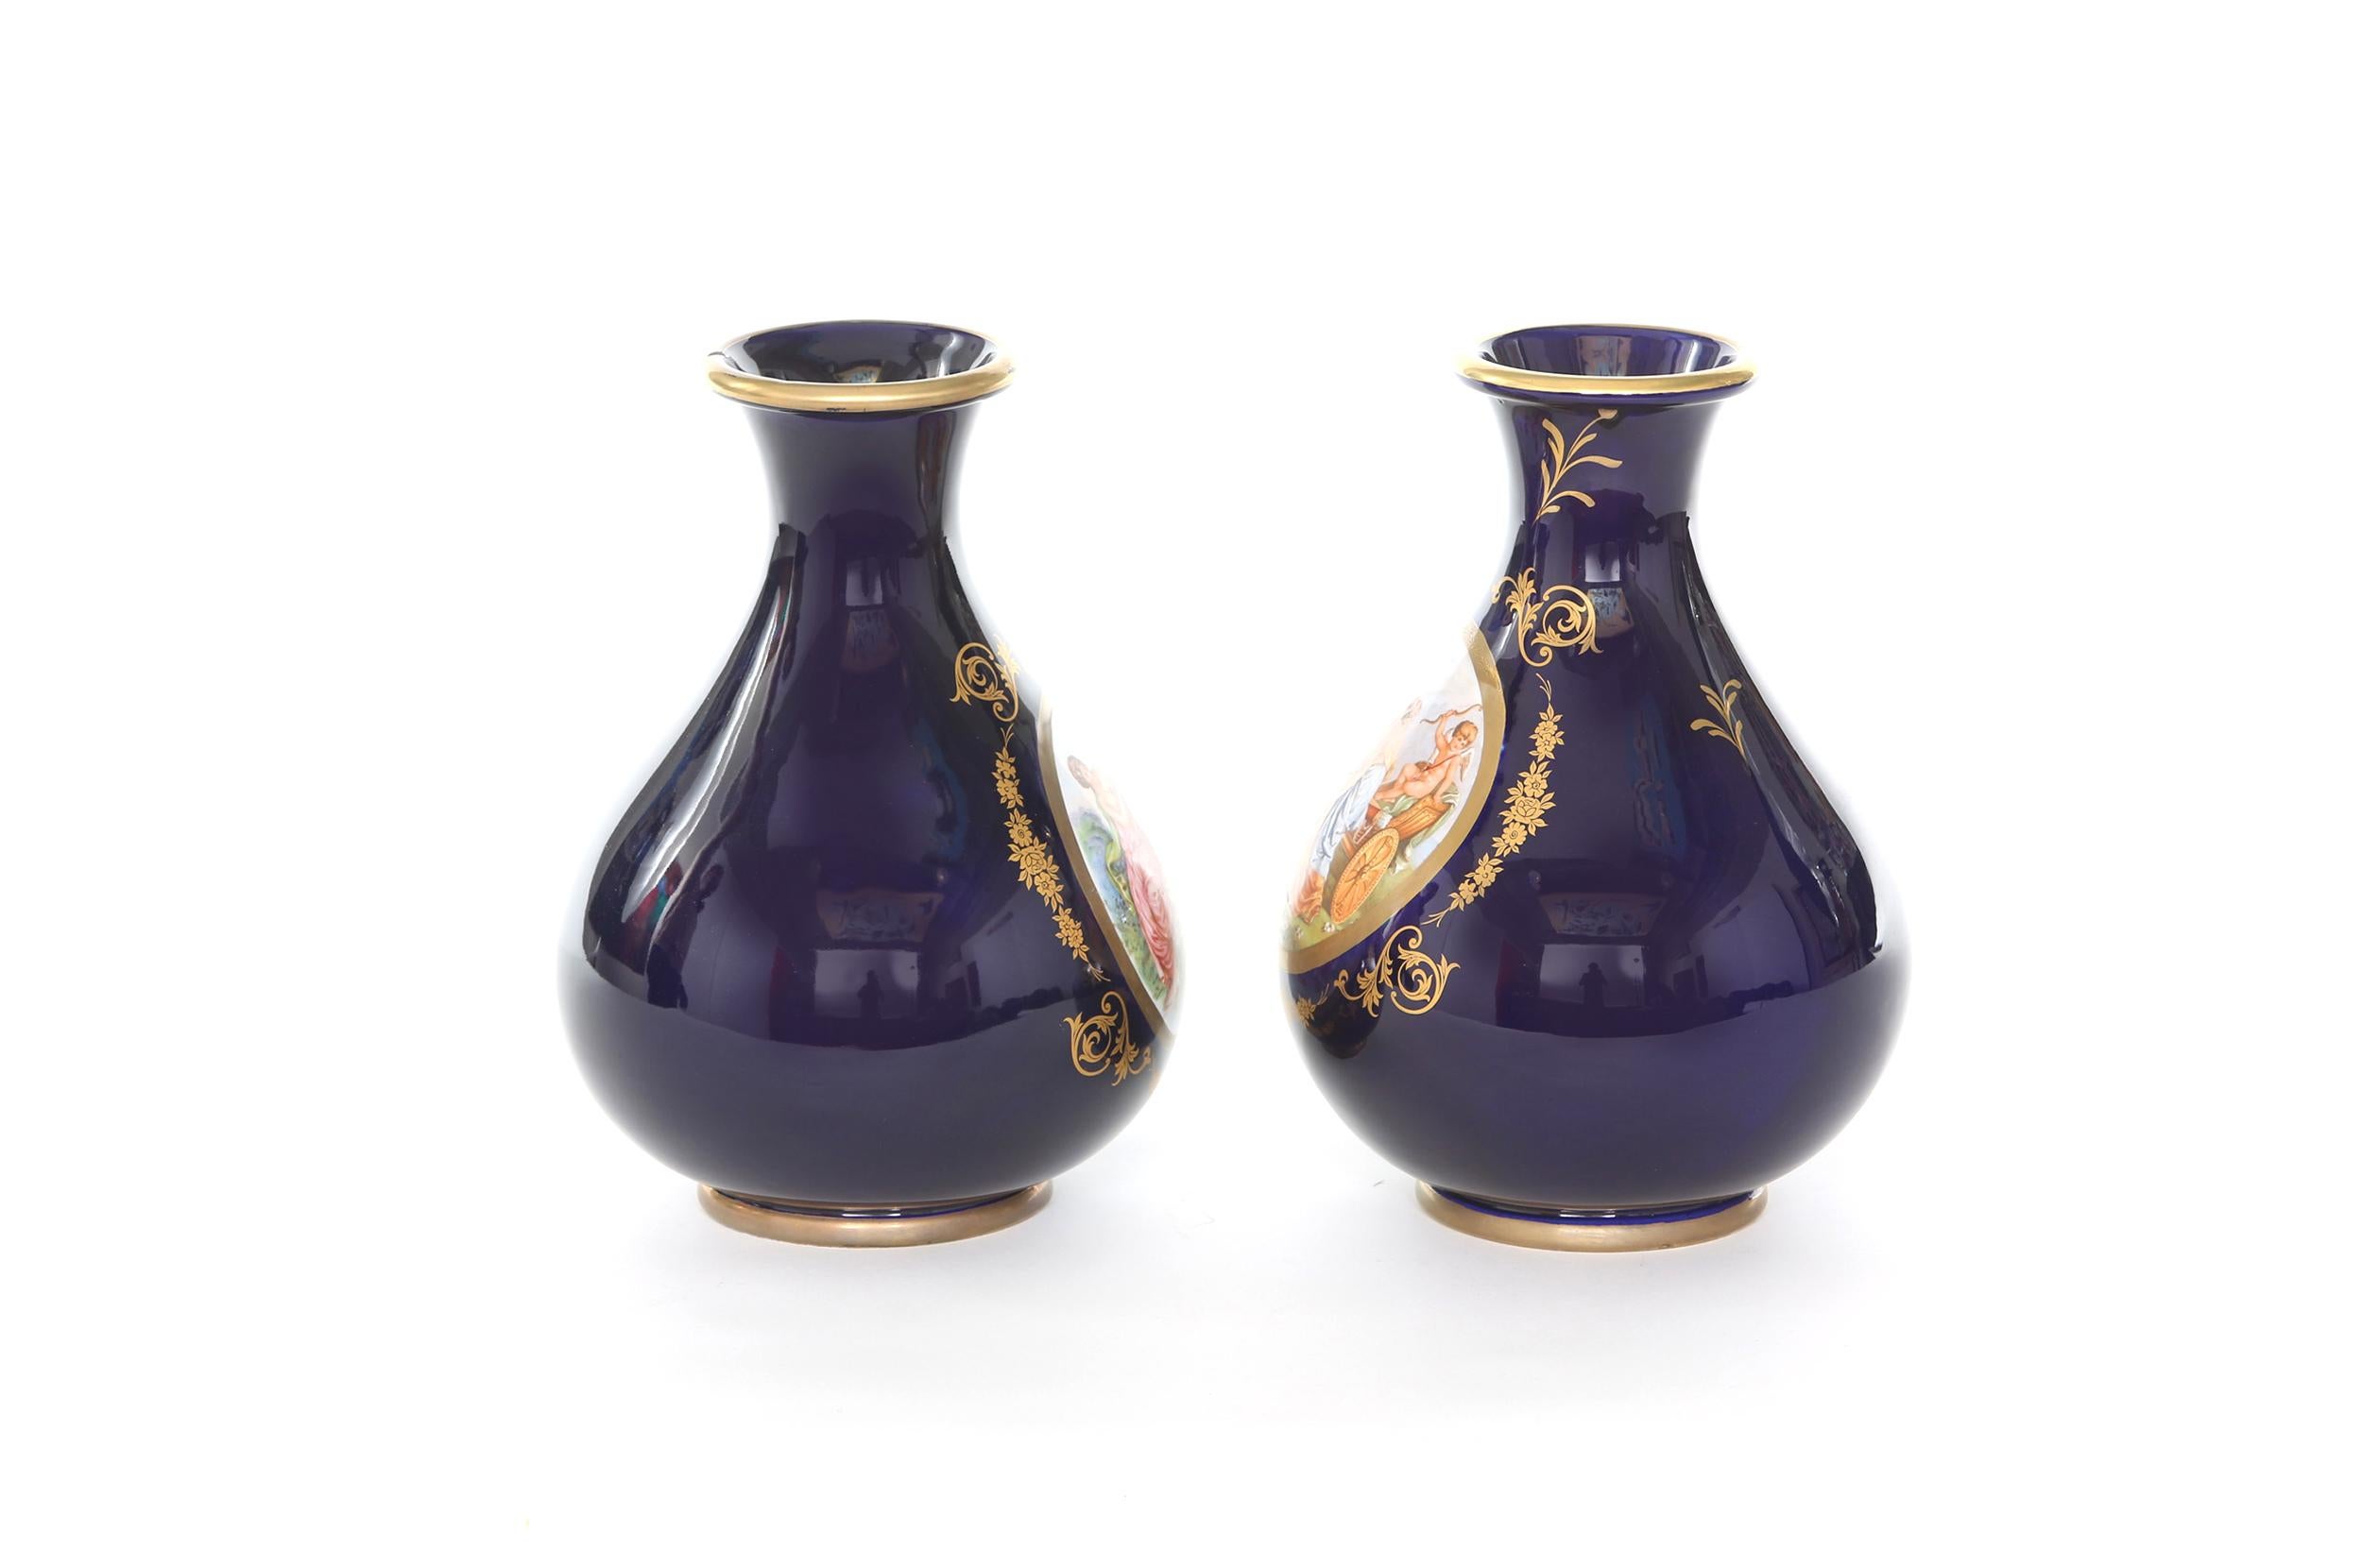 Mid-20th century Italian gilt porcelain decorative pair of vases with exterior design details. Each vase is in great condition. Minor wear consistent with age / use. Maker's mark undersigned. Each vase stands about 11 inches tall x 7.5 inches